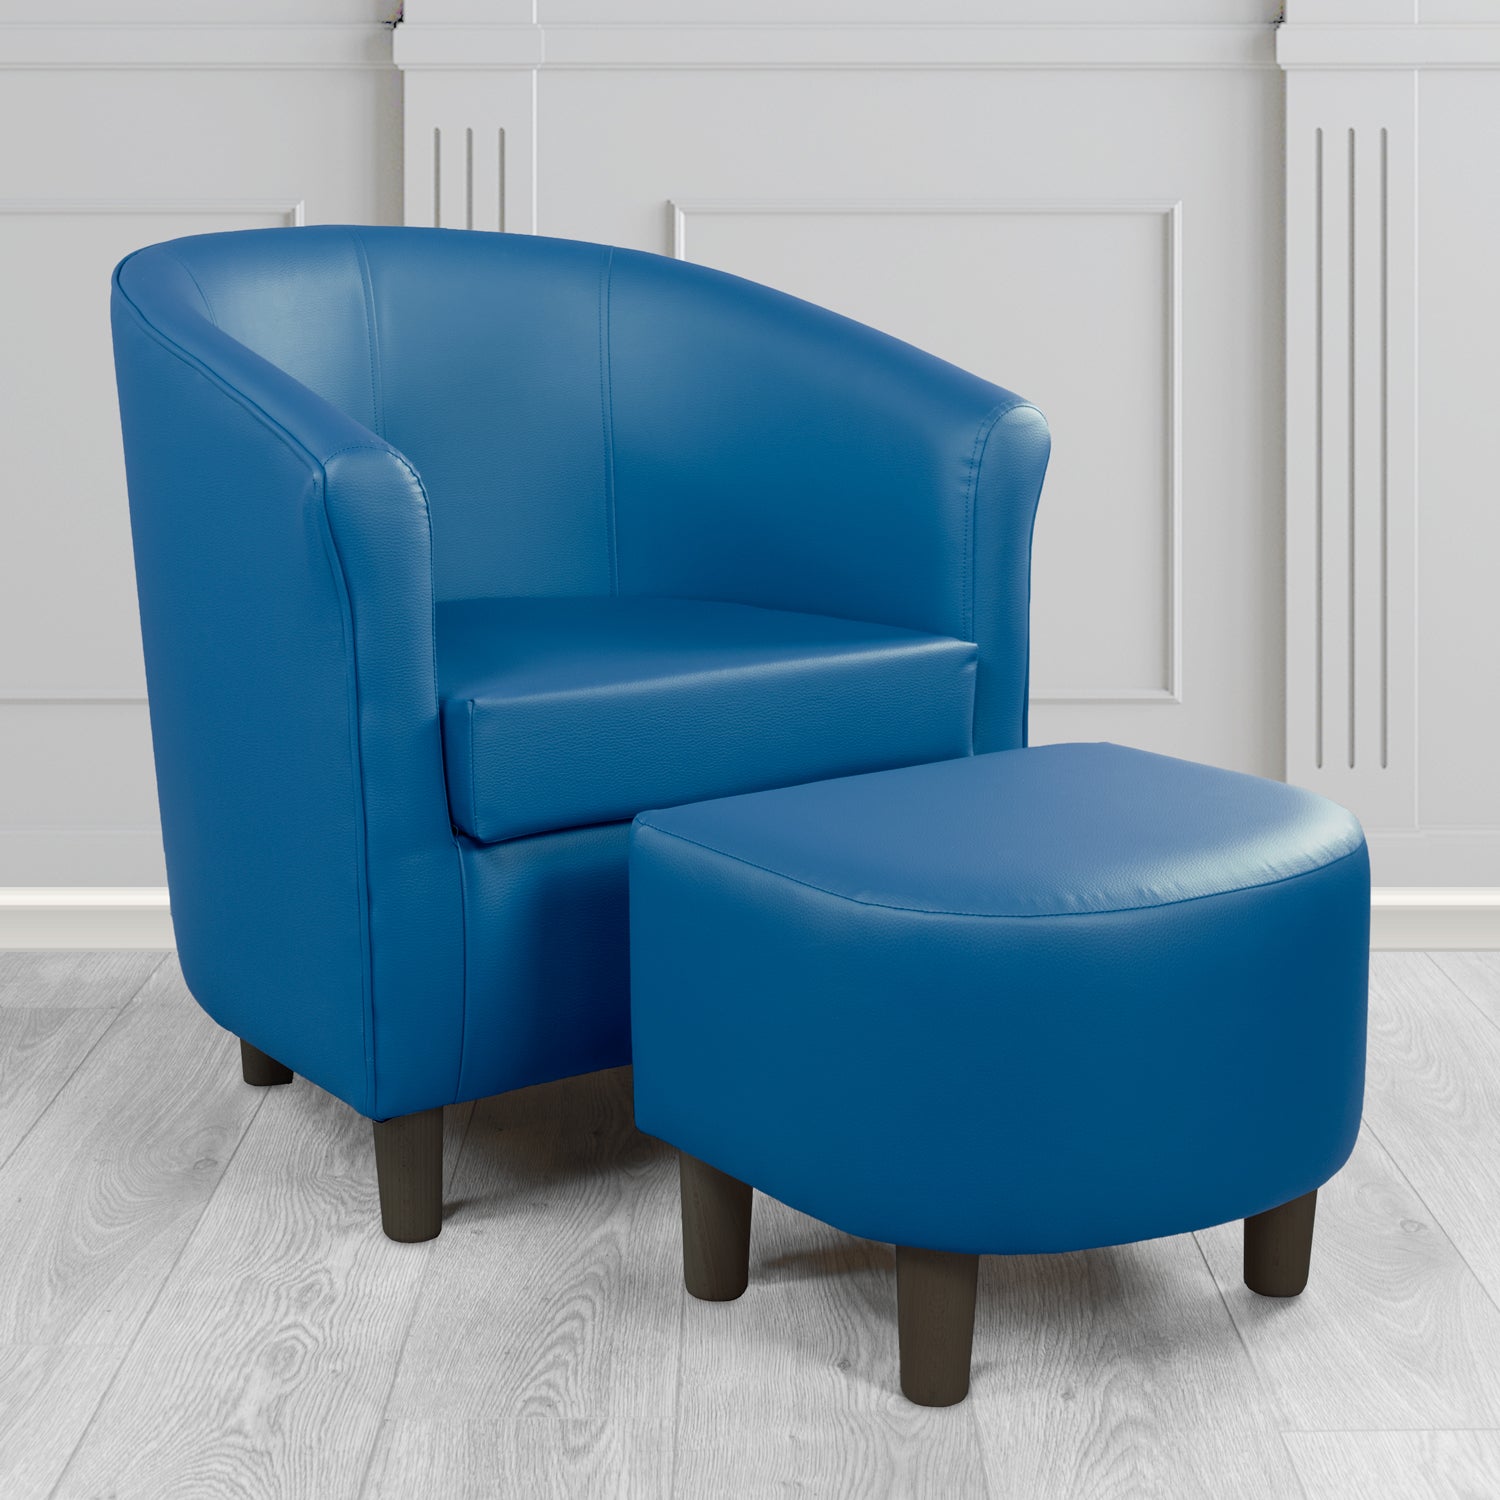 Tuscany Tub Chair with Footstool Set in Madrid Royal Faux Leather - The Tub Chair Shop